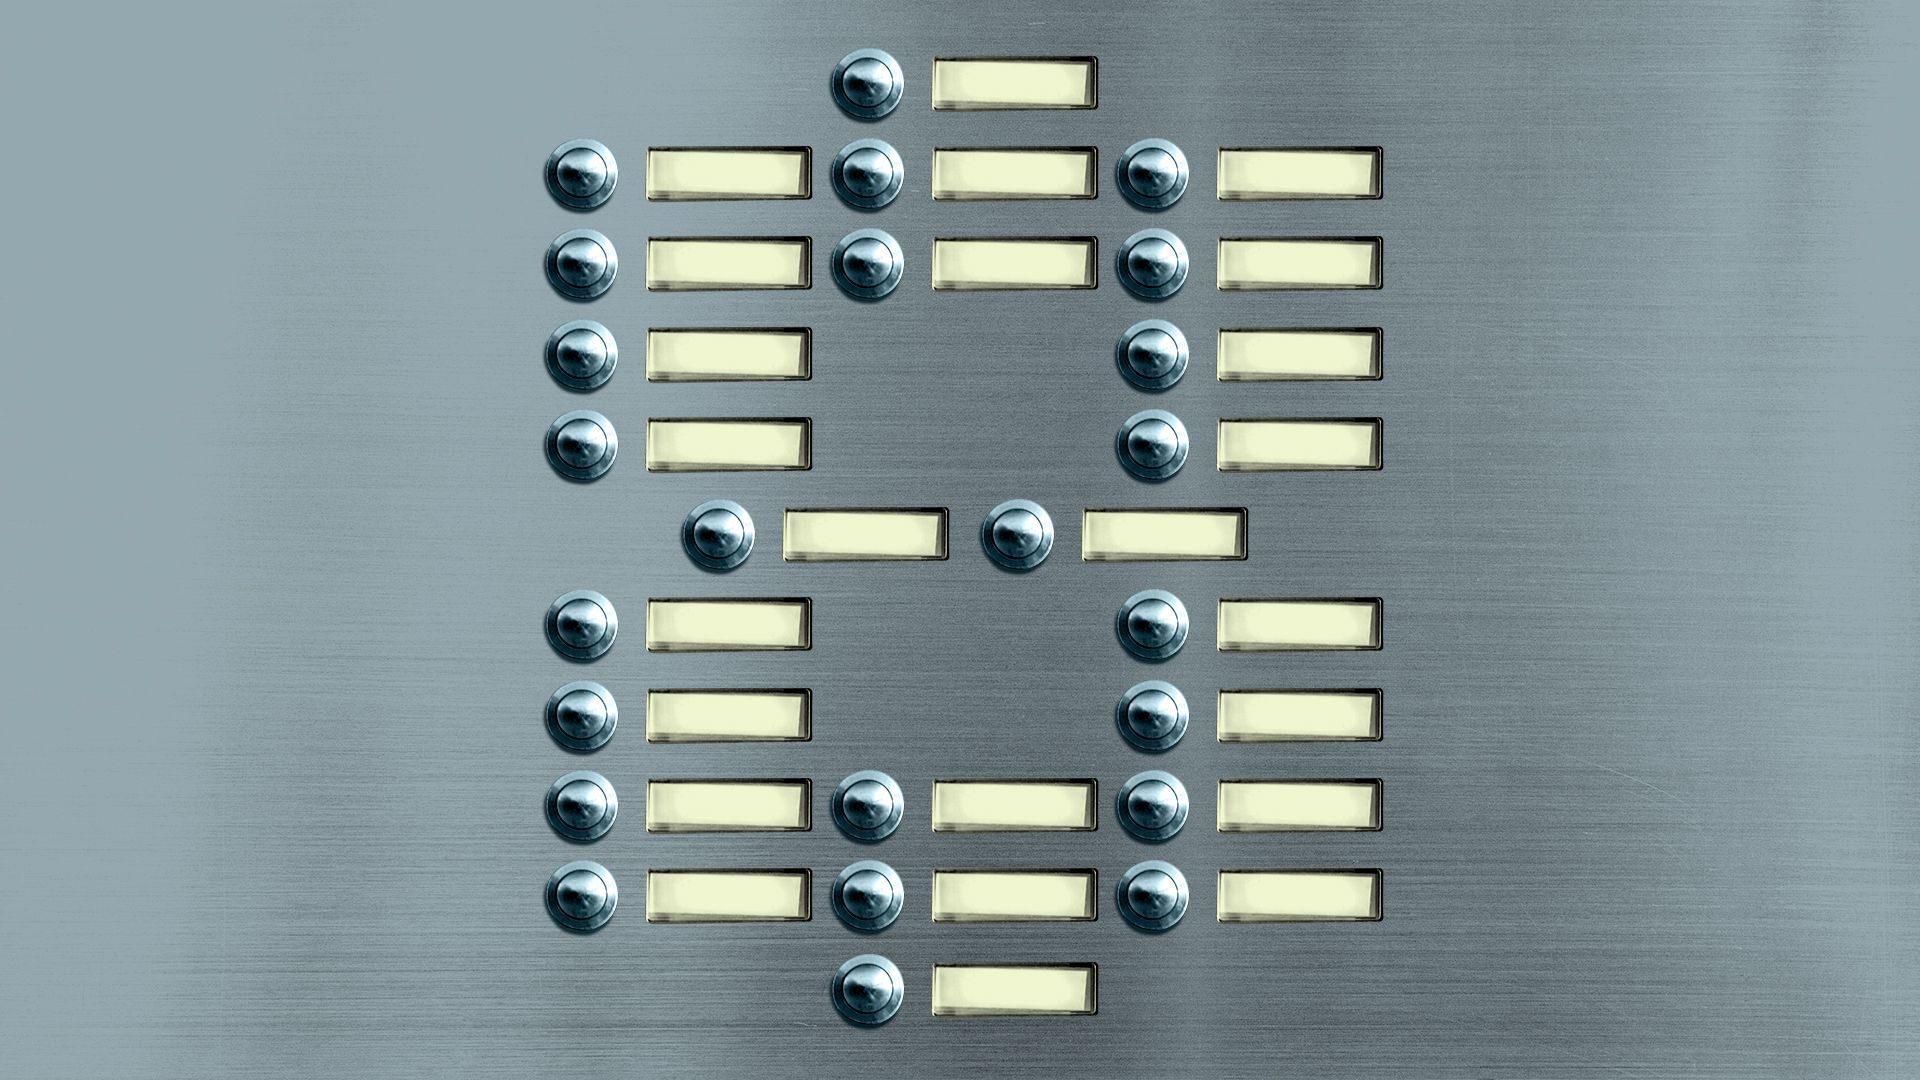 Illustration of apartment doorbells in the shape of an eight.